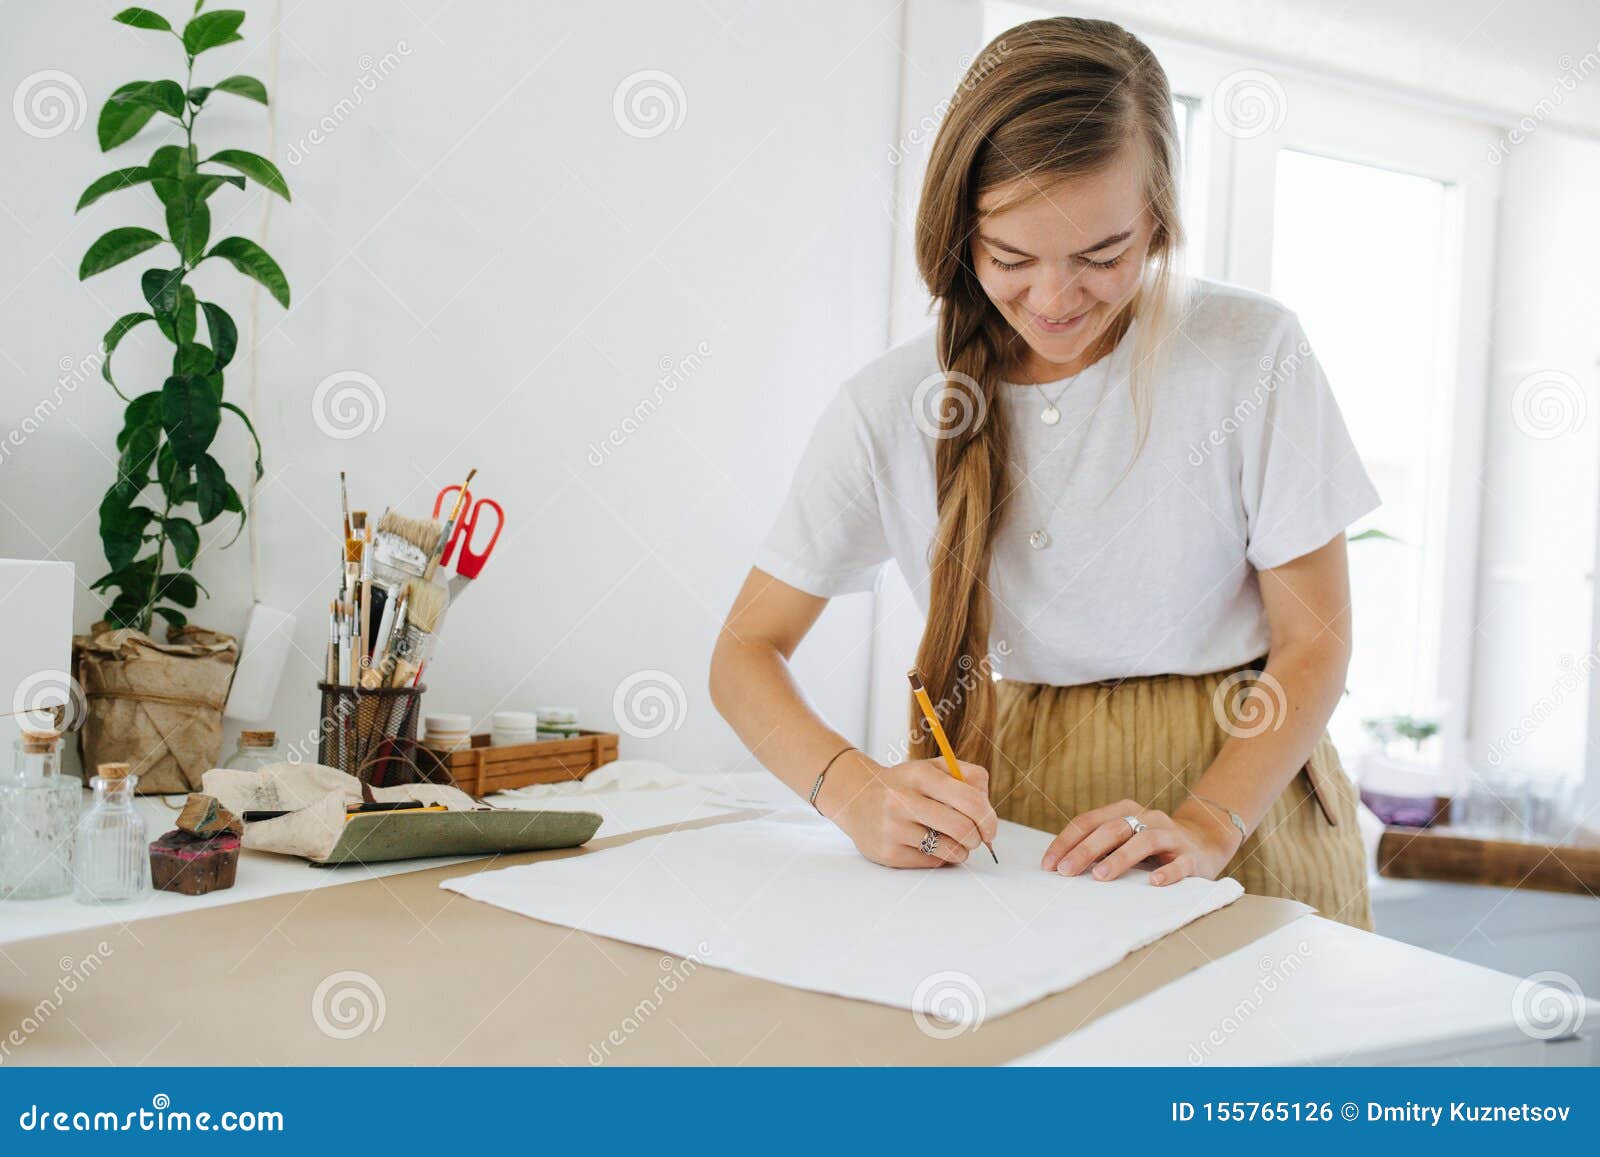 Young Woman Artist Drawing on Sheet, Behind the Table at Home. Stock ...